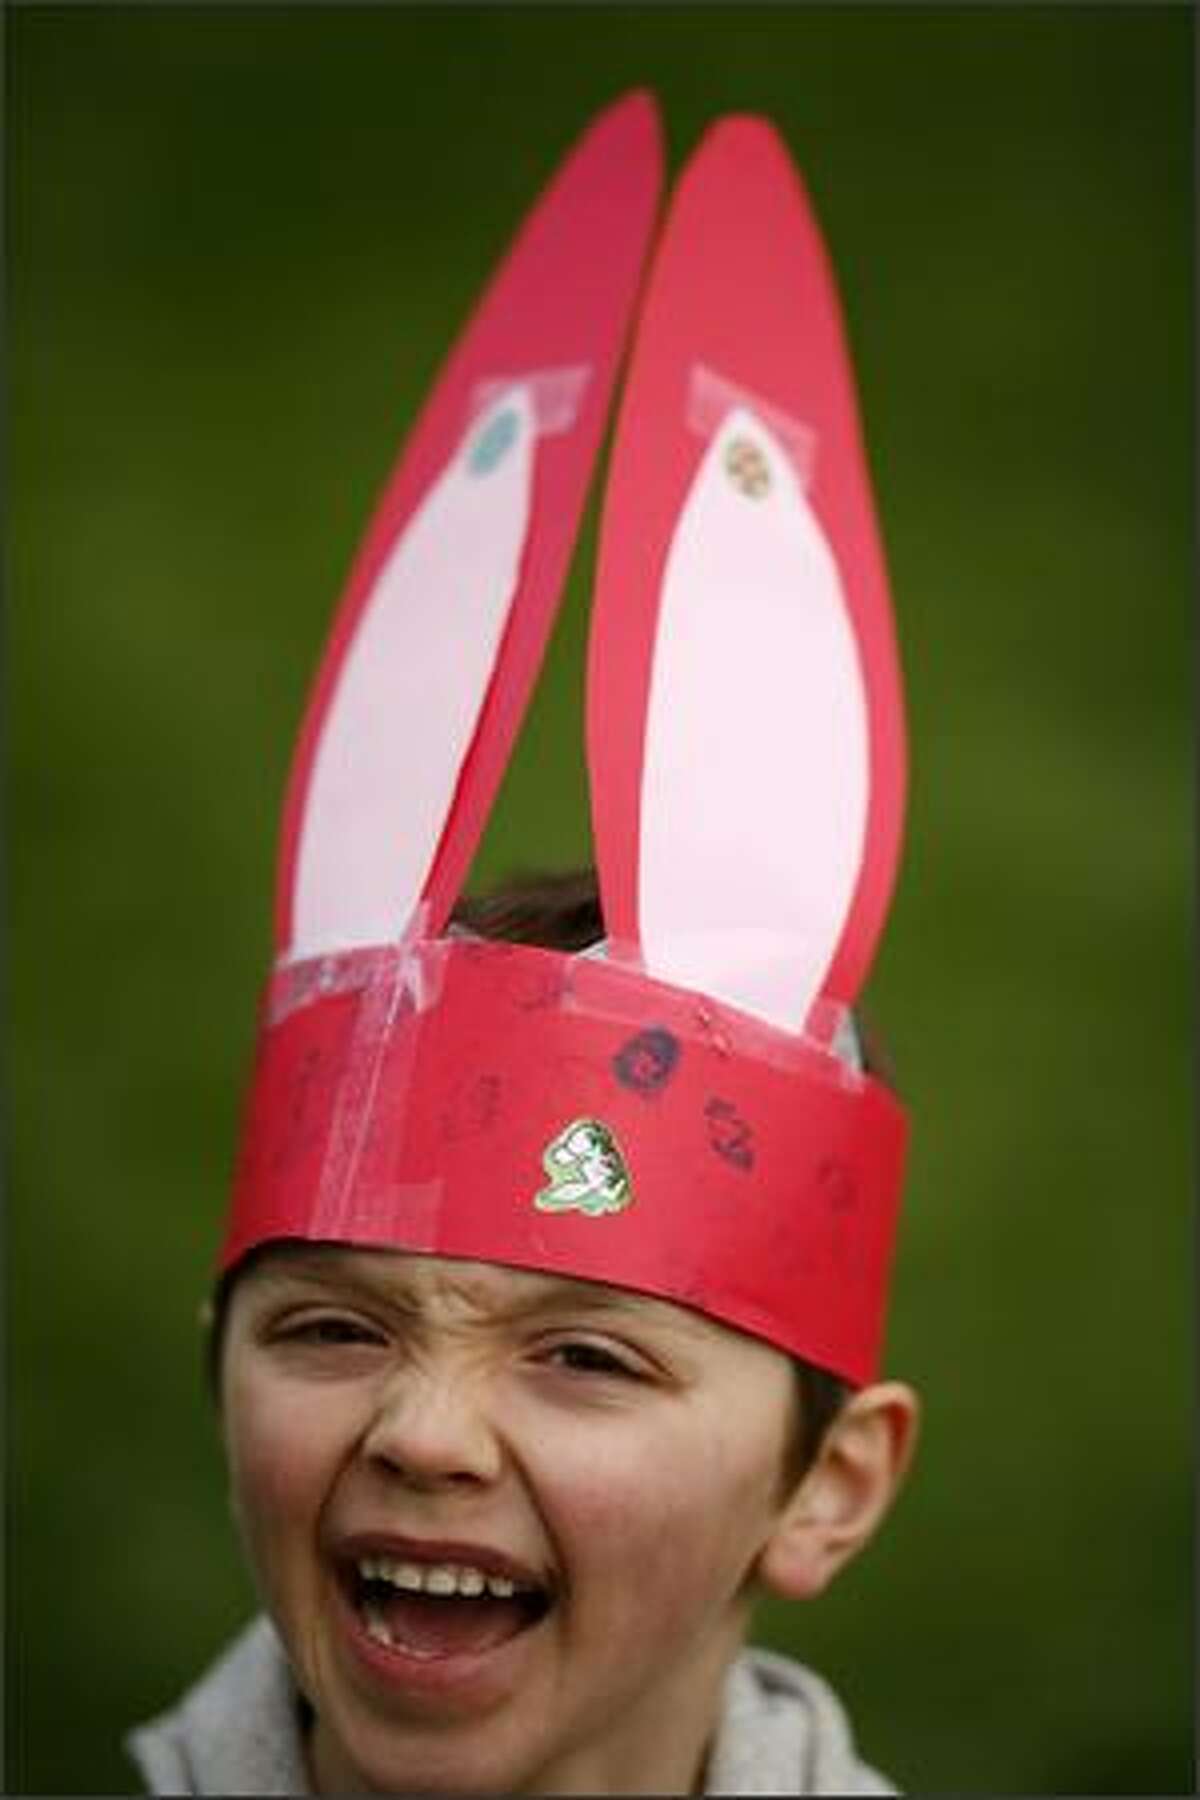 Emmett Kineman shows off the bunny ears he made during the Woodland Park Zoo's Bunny Bounce on Saturday in Seattle. The event included an Easter egg hunt and other activities for kids.